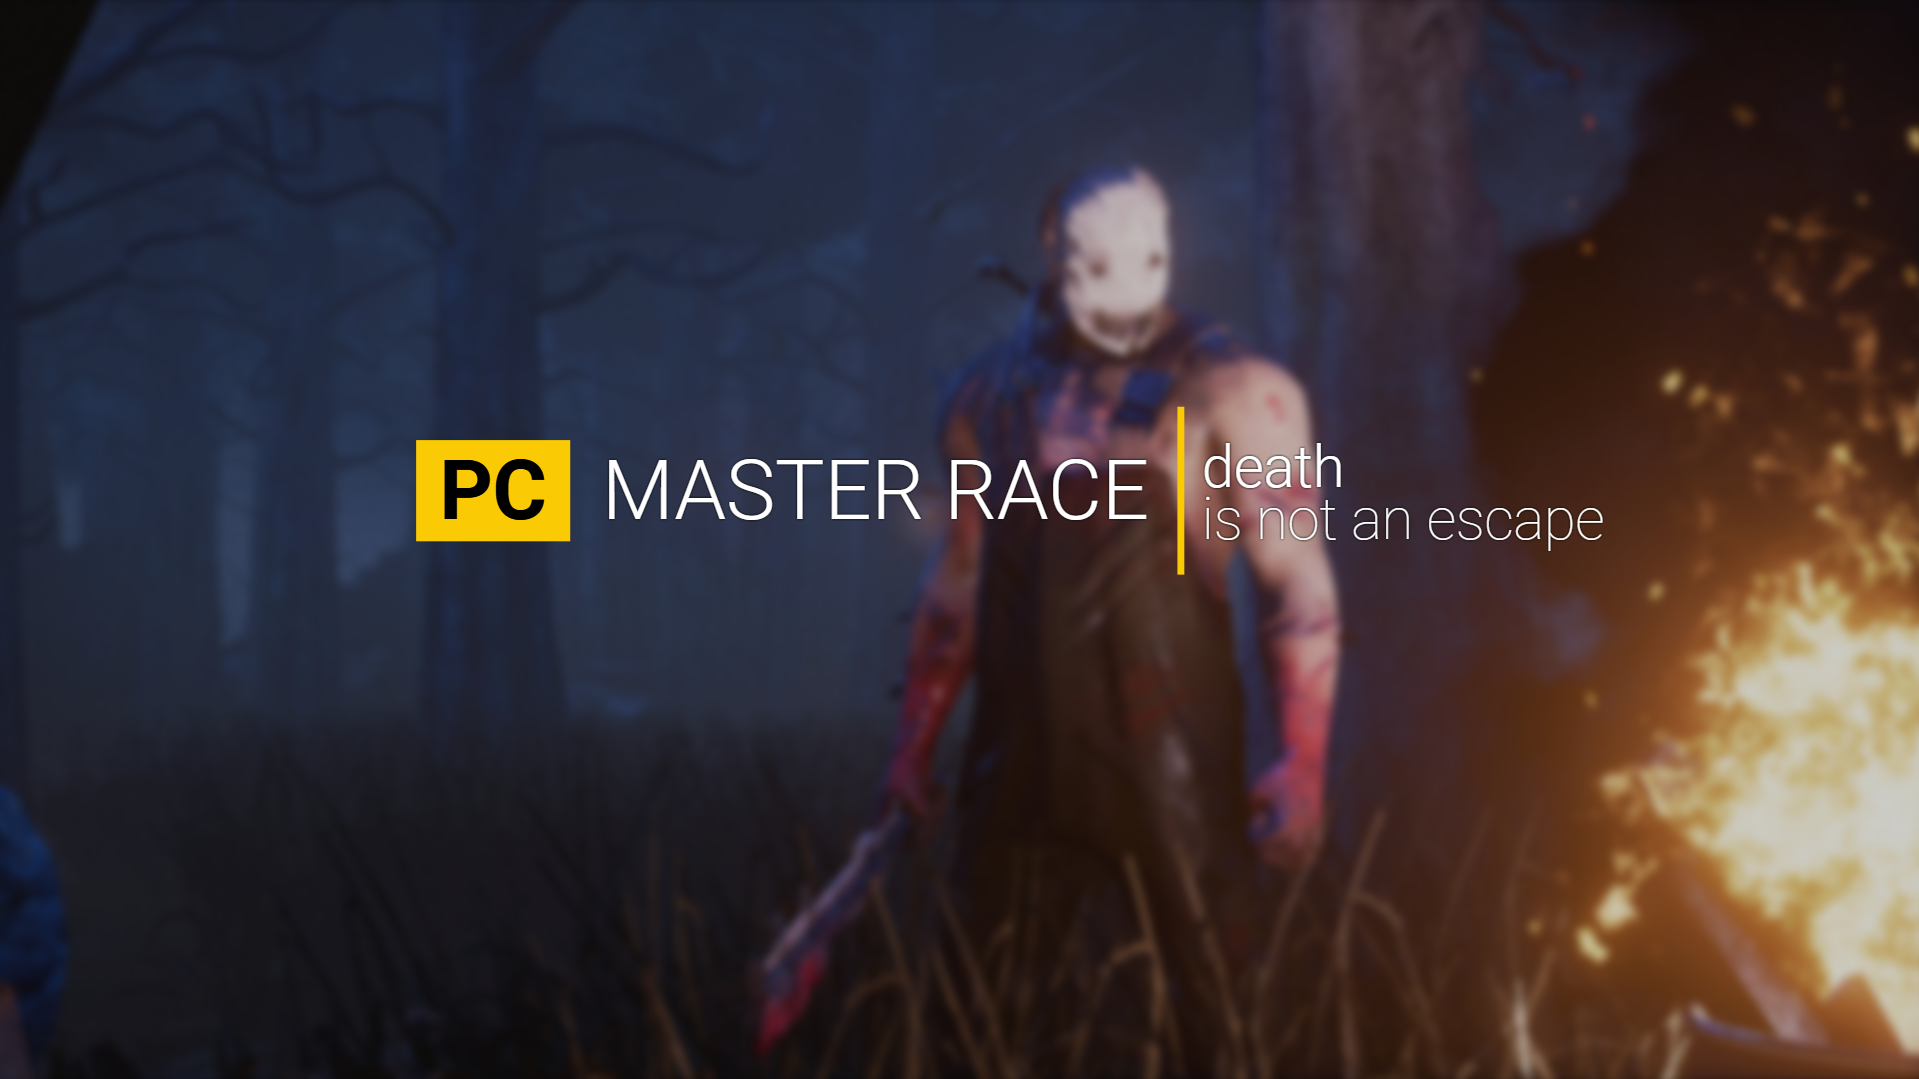 Pretty Cool Pcmr Dbd Wallpaper I Made - Dead By Daylight Default Killers , HD Wallpaper & Backgrounds